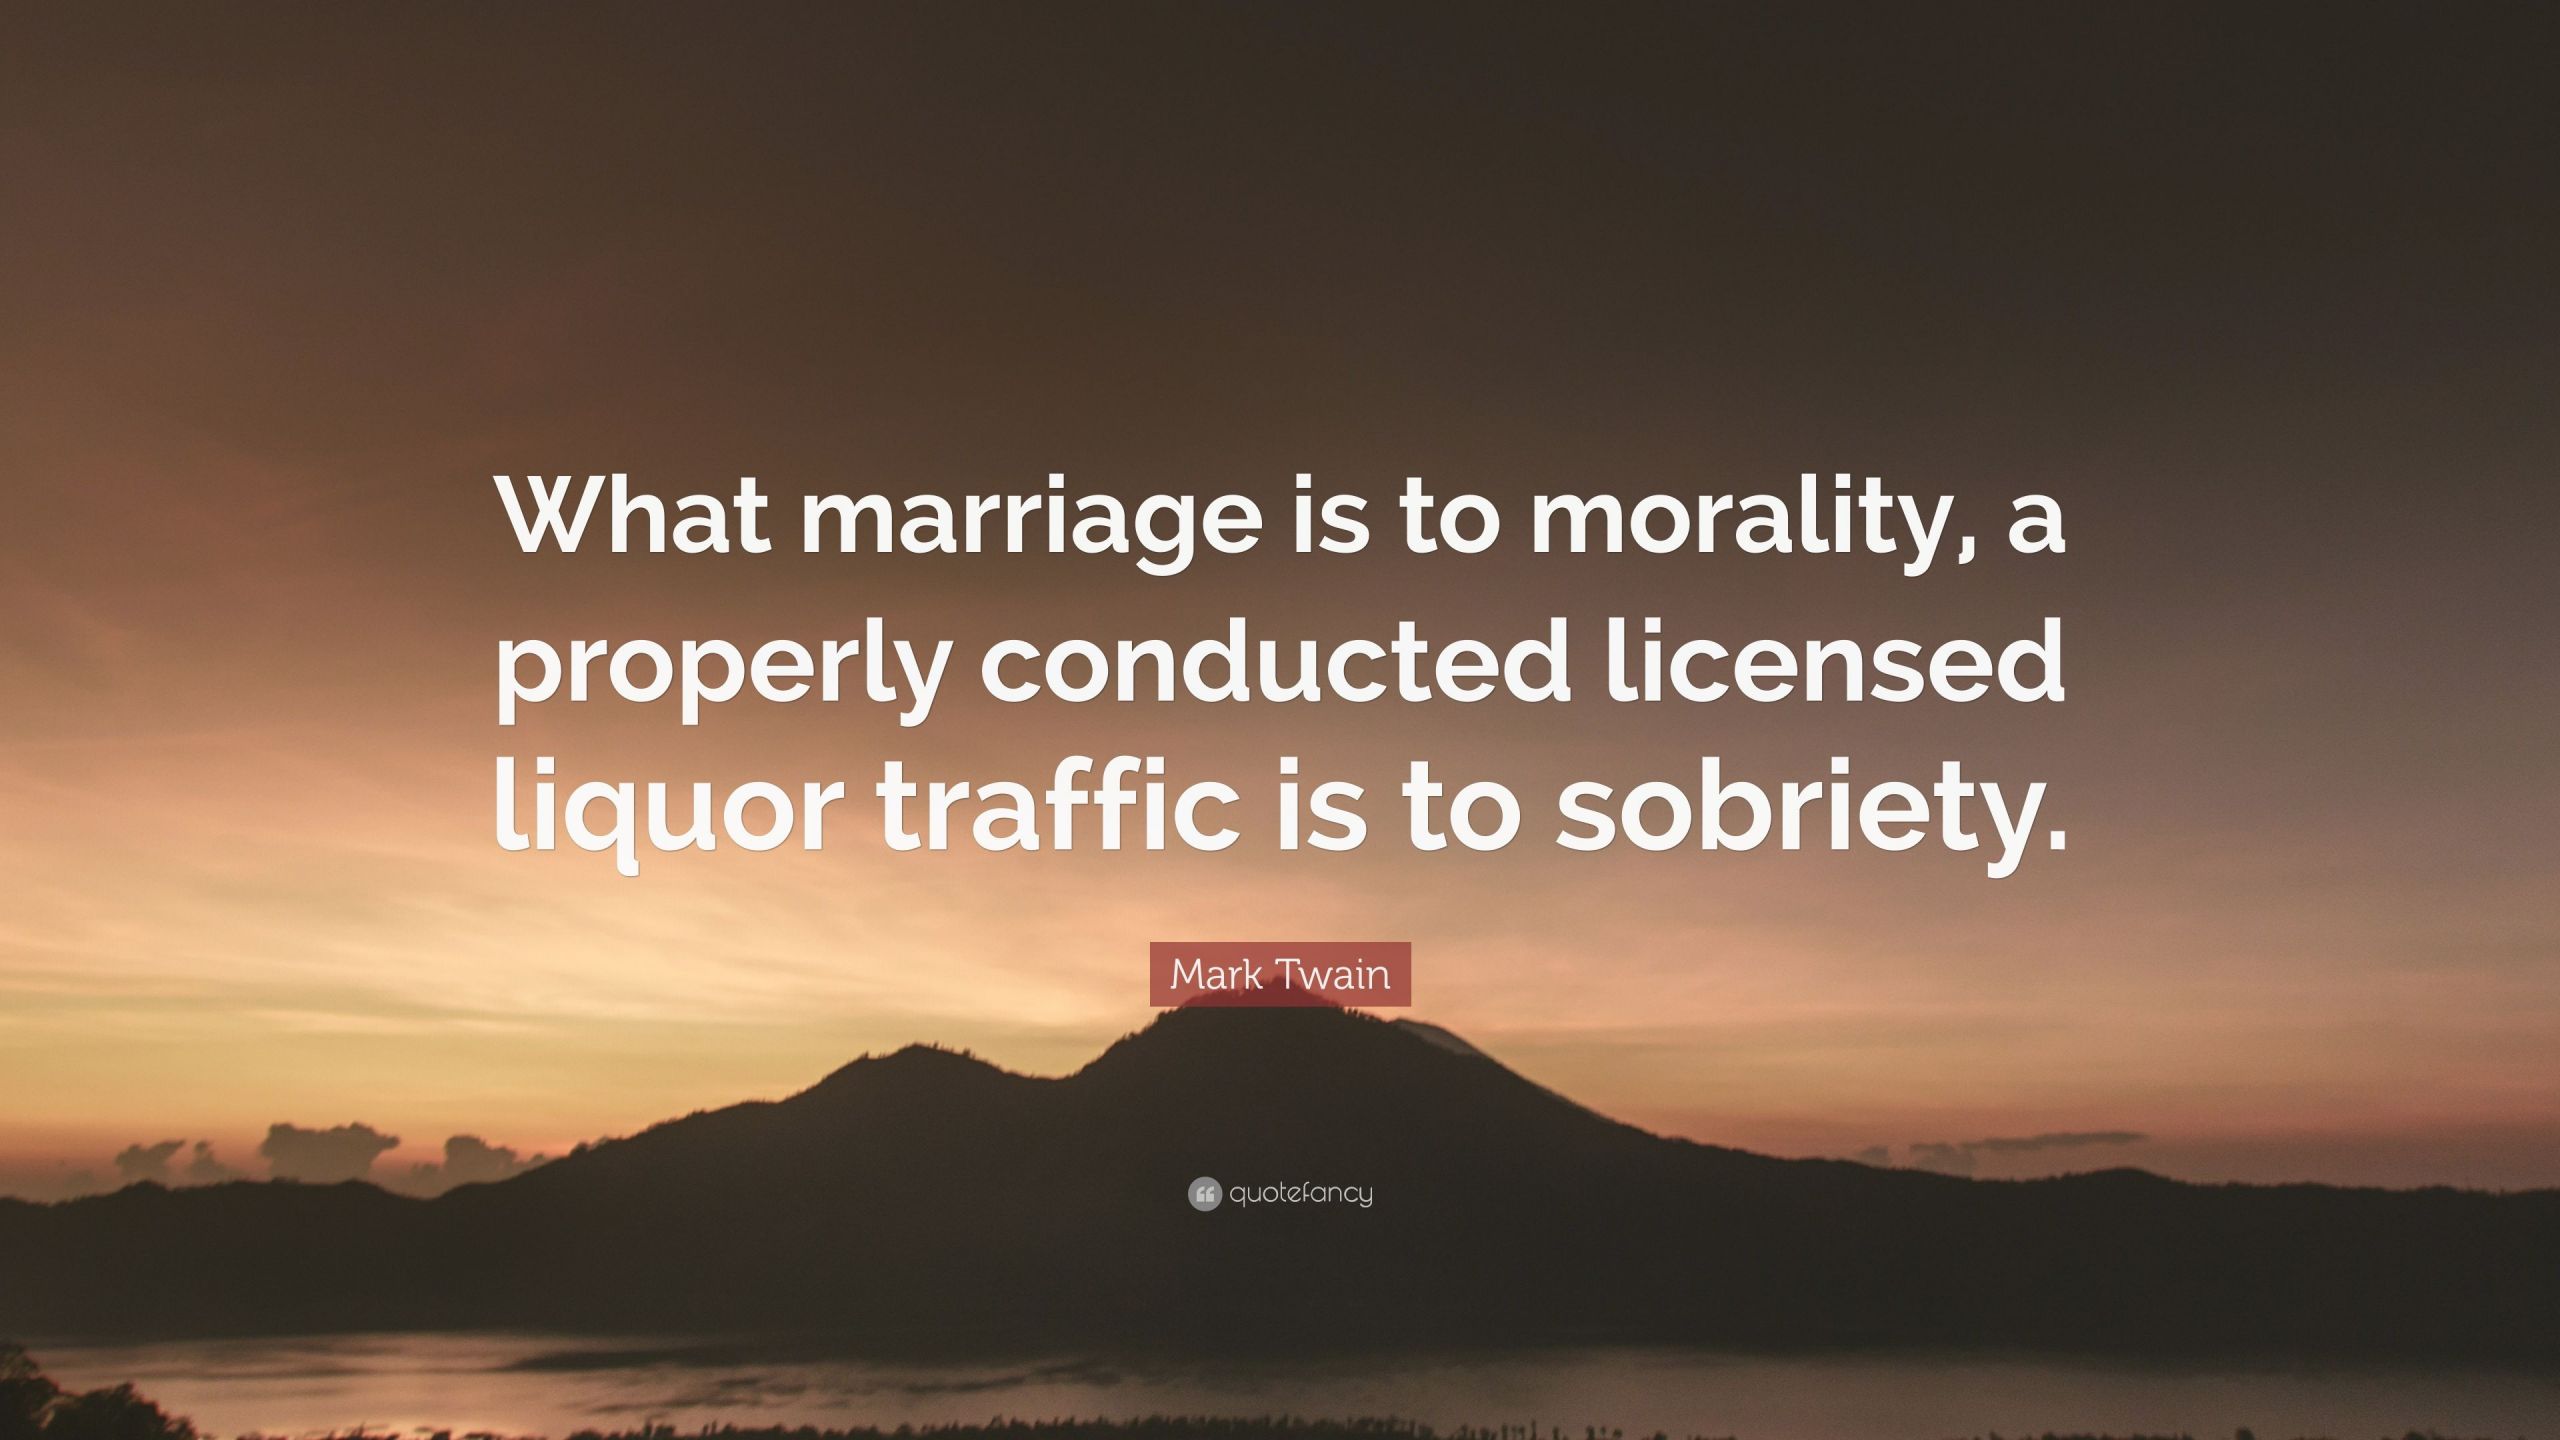 Mark Twain Marriage Quotes
 Mark Twain Quote “What marriage is to morality a